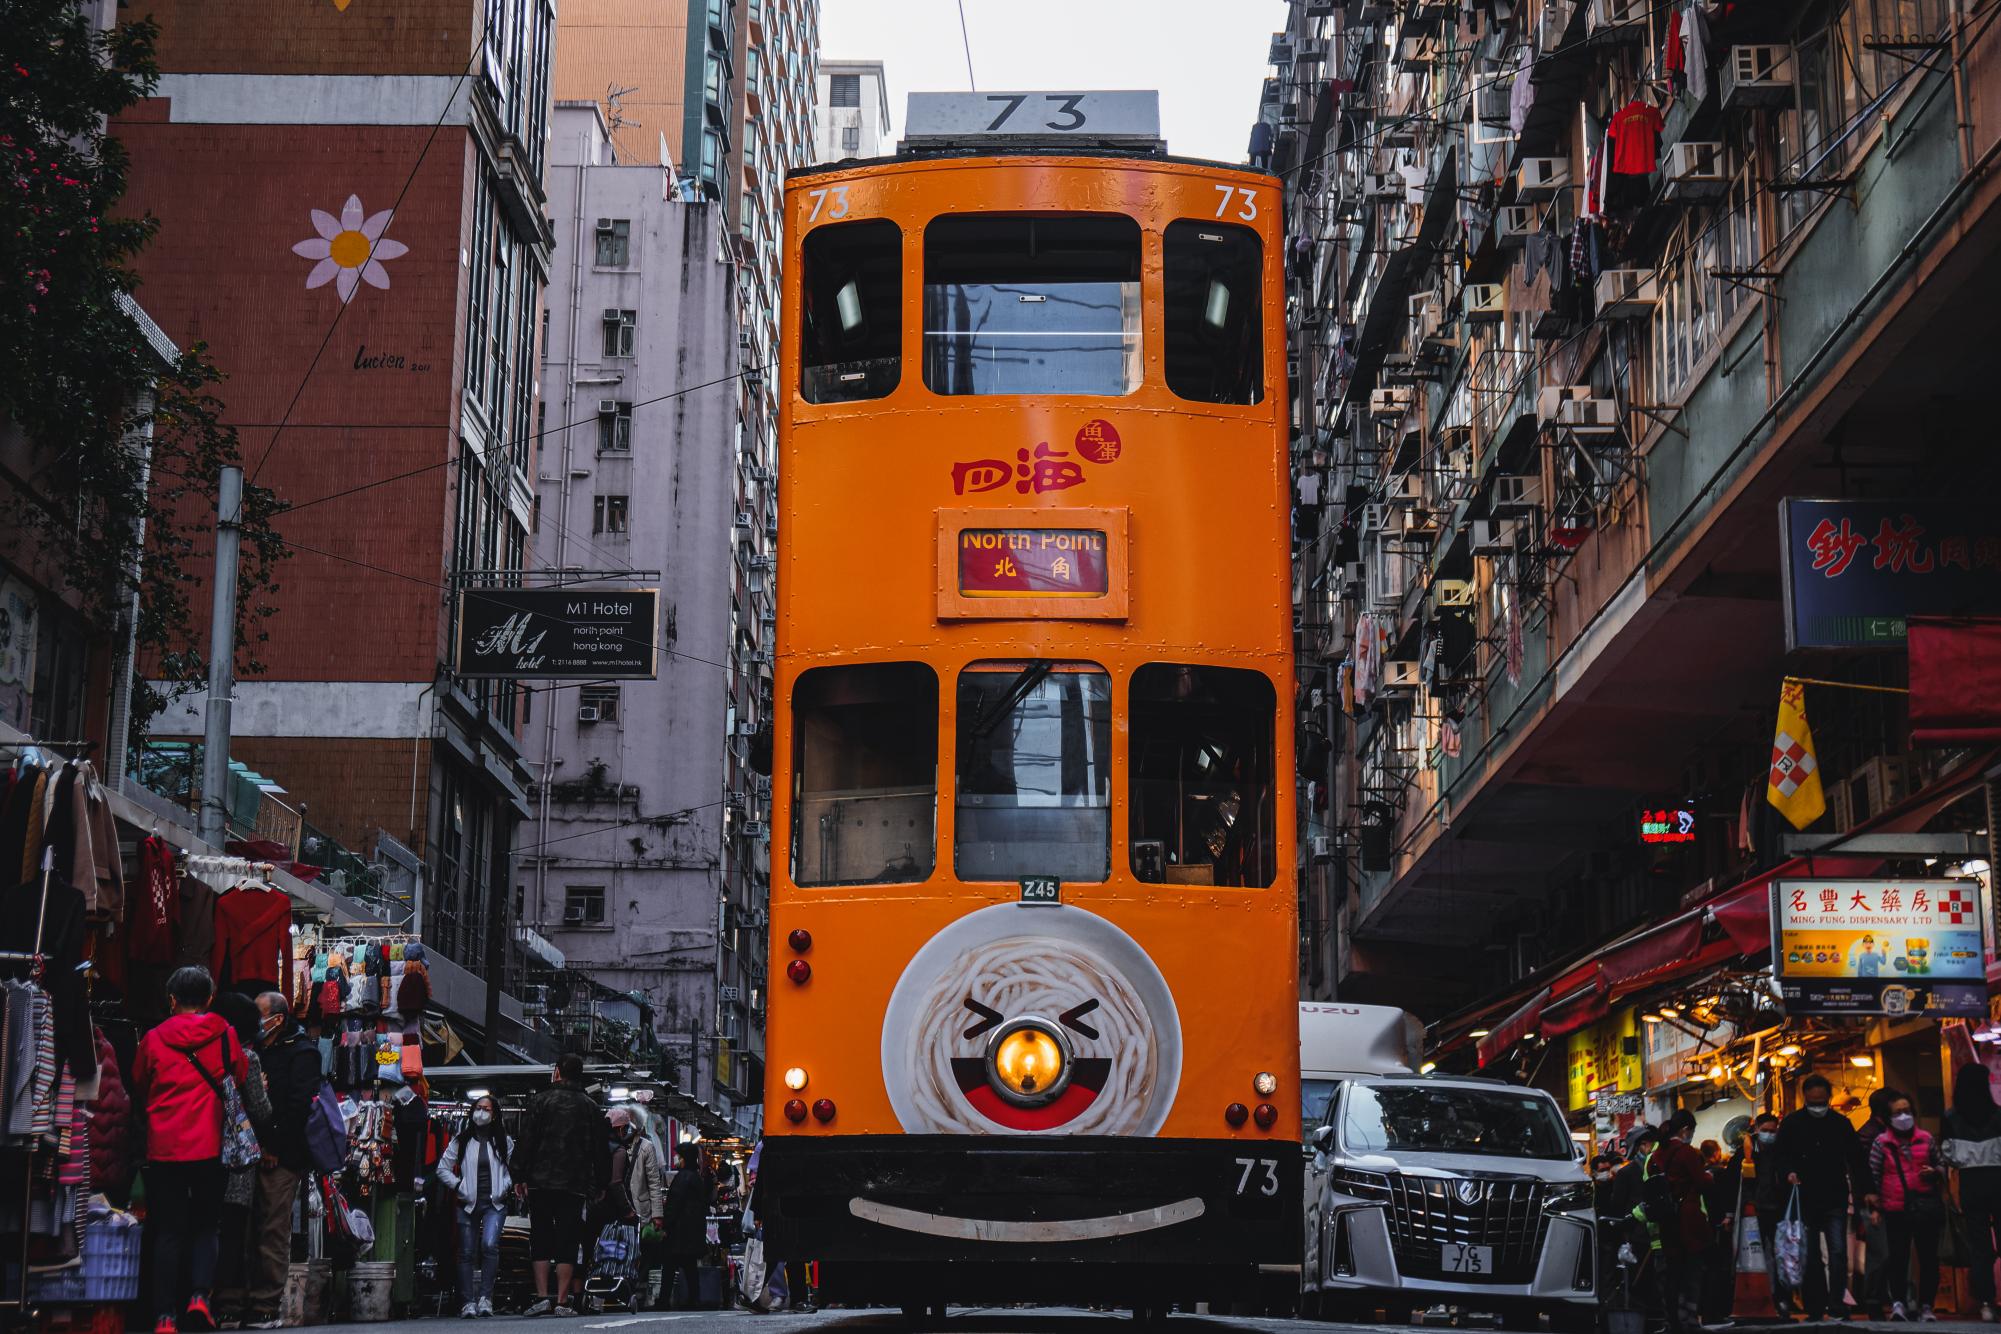 Hong Kong’s North Point tram travels down a street market on its way to North Point Terminus. Tommy Michael (25) used a Sony NEX7 with a 24-70mm lens for this shot. 
